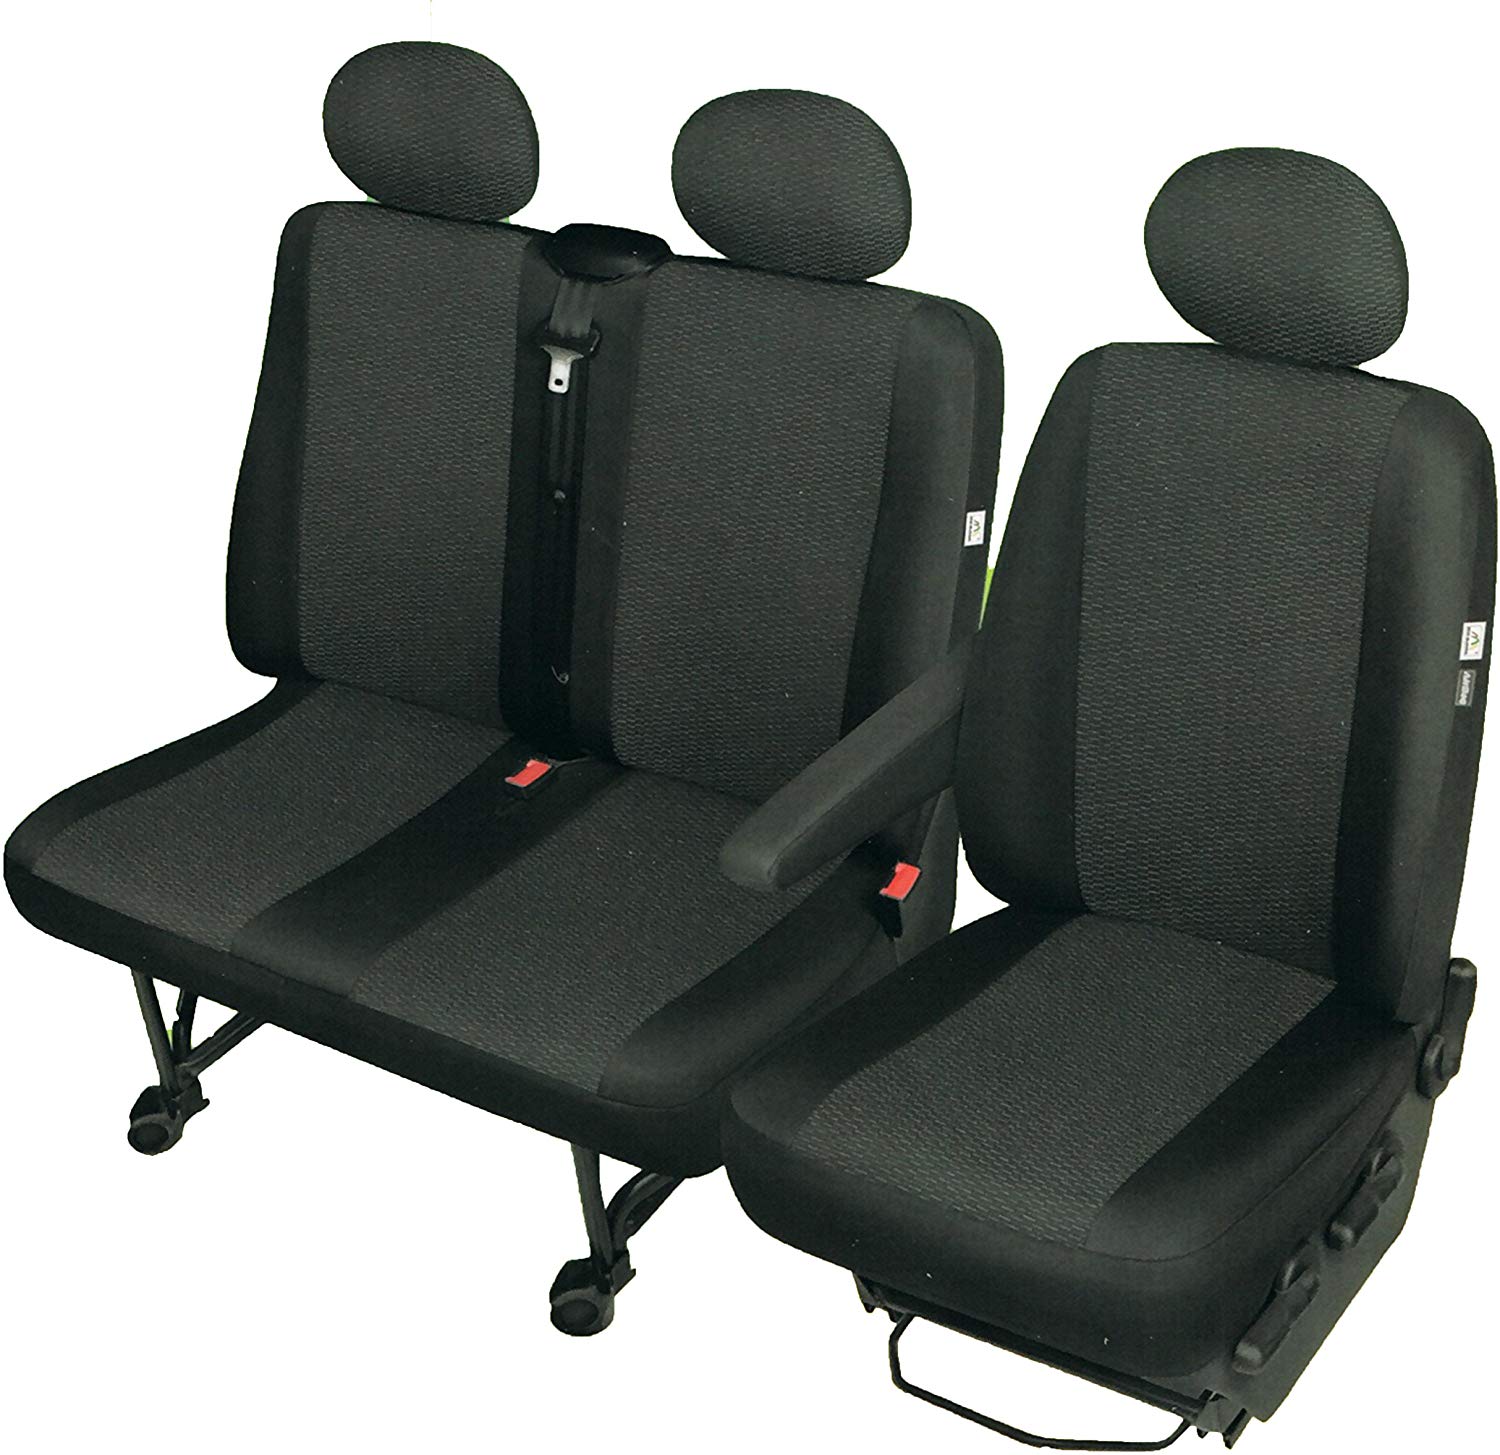 SEAT COVERS Renaut Trafic Front Drivers + Double Bench Three Seater TÜV Tested Quality